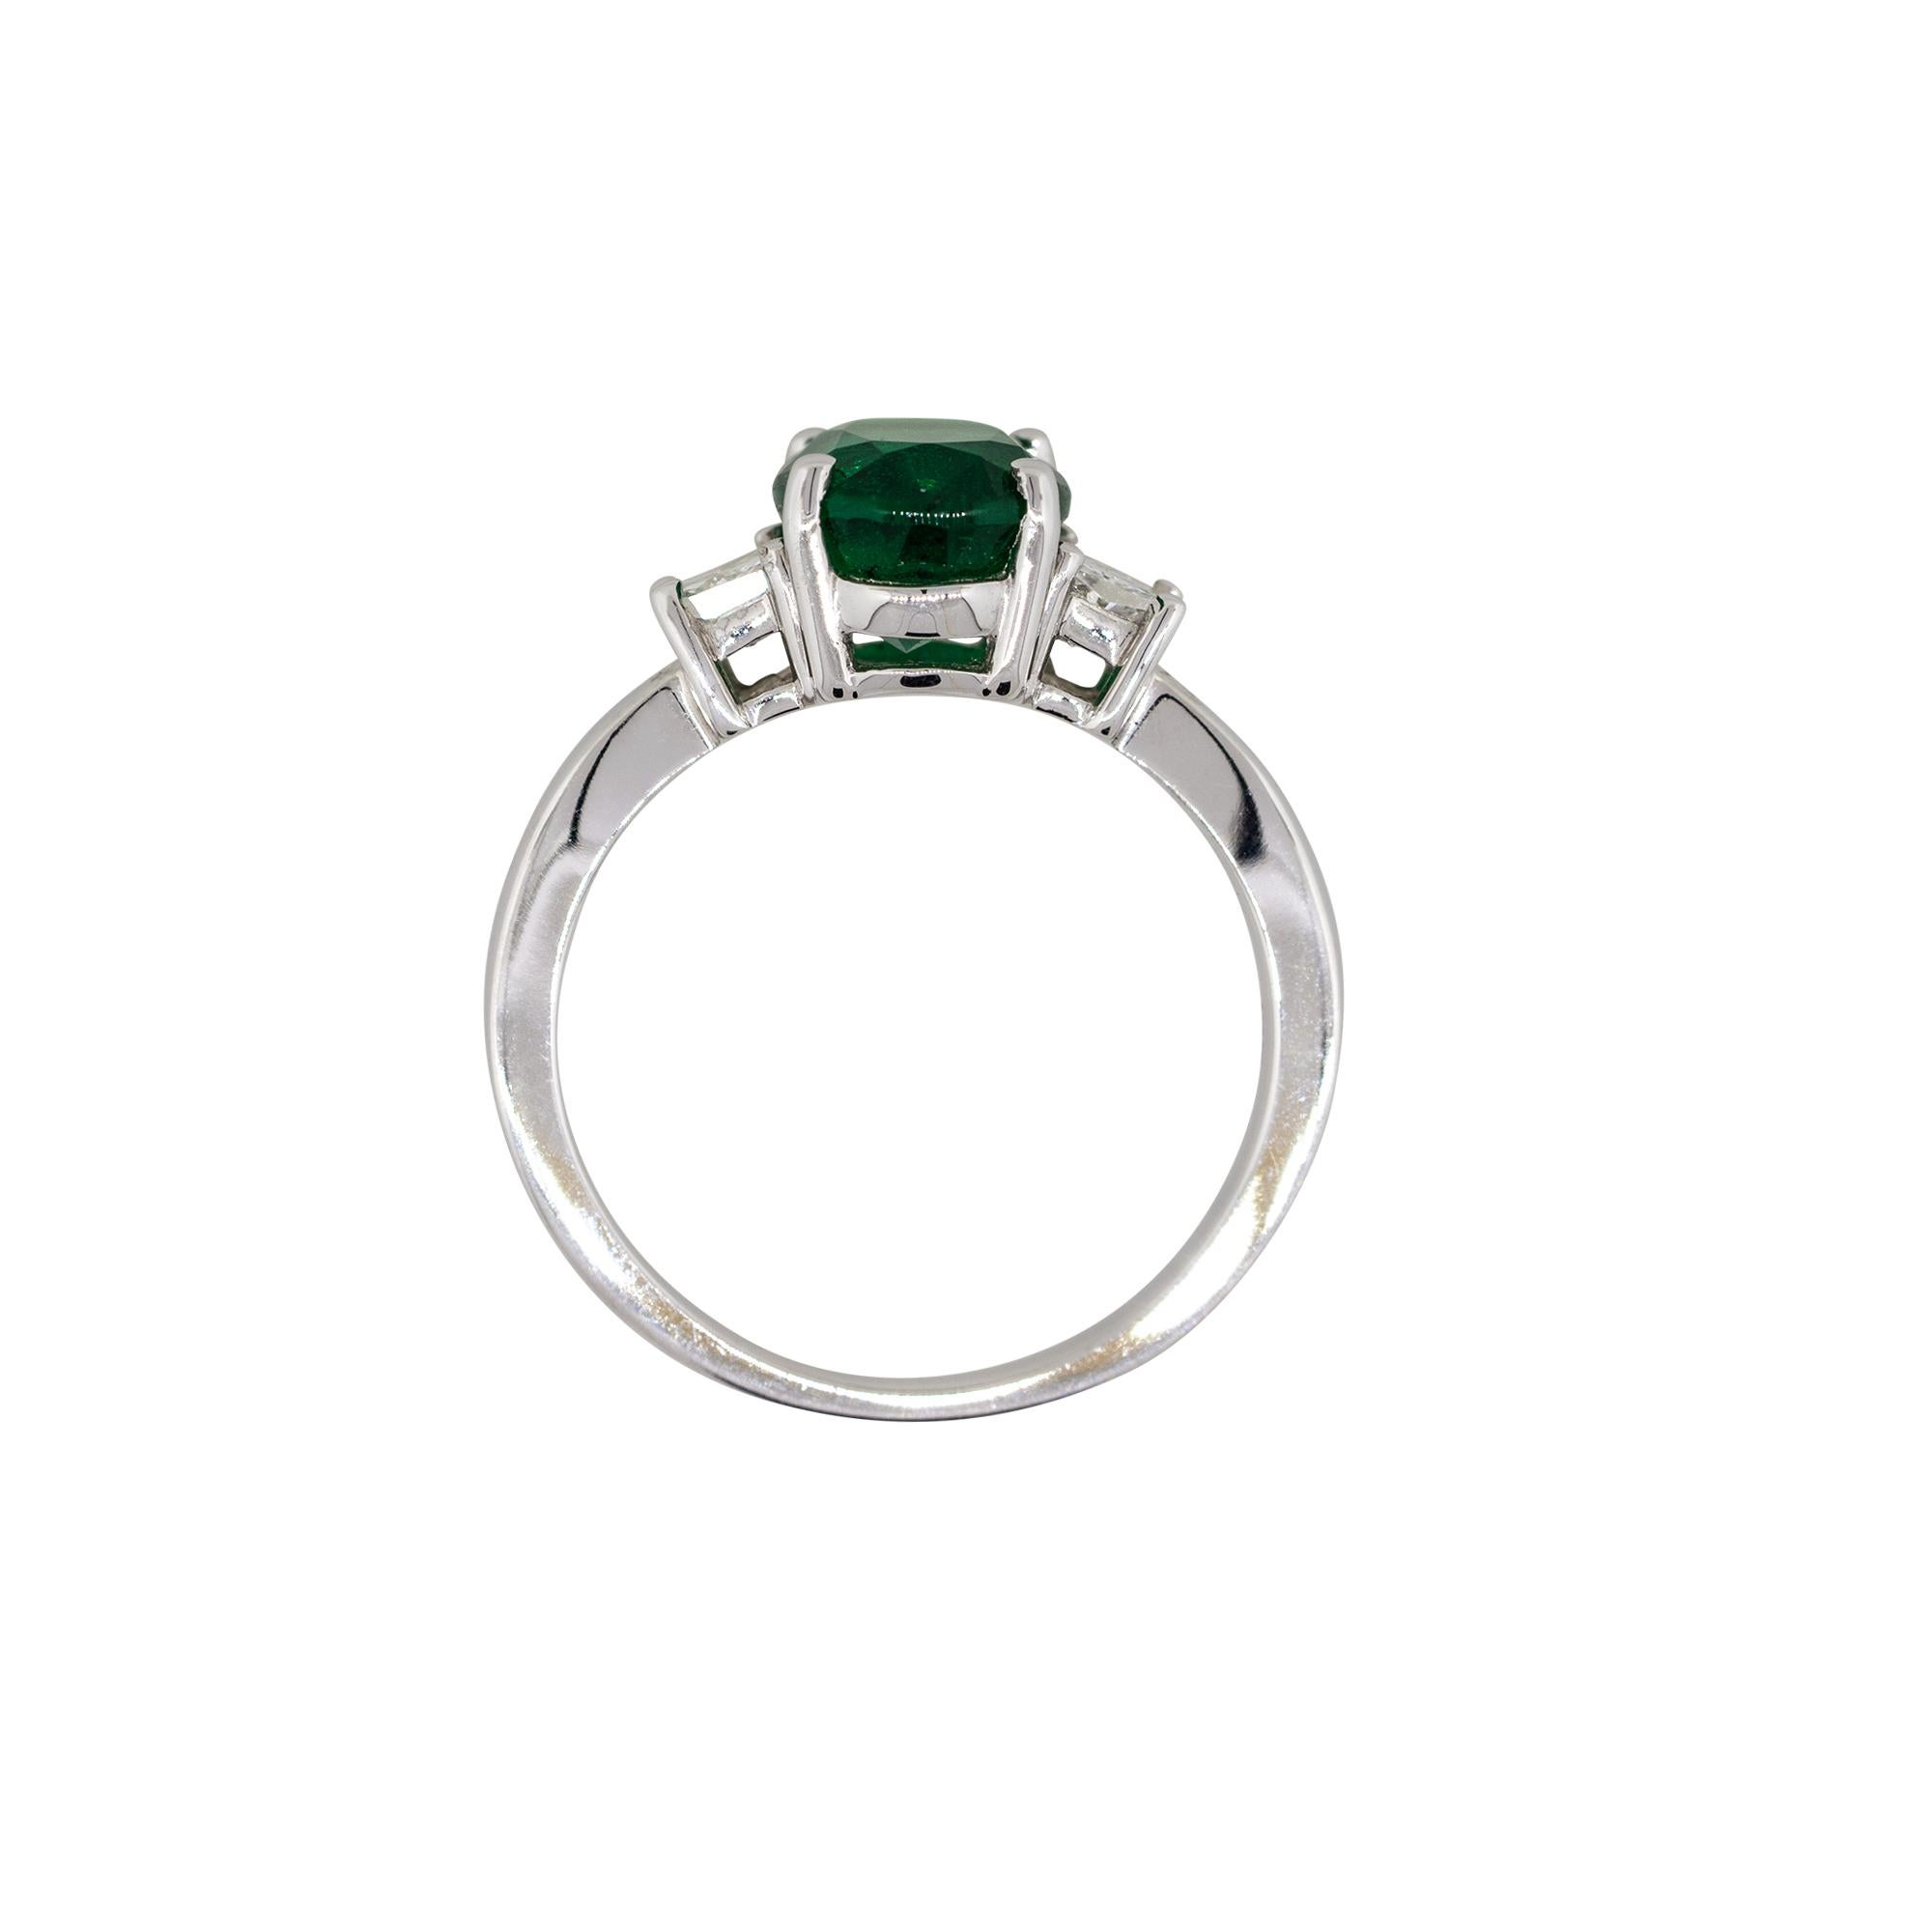 Style: Three stone emerald ring with diamonds
Material: 18k White gold
Diamond Details: Approximately 0.34ctw of trapezoid cut diamonds. Diamonds are G/H in color and VS in clarity
Gemstone Details: Approx. 2.45ct oval cut emerald gemstone. Center